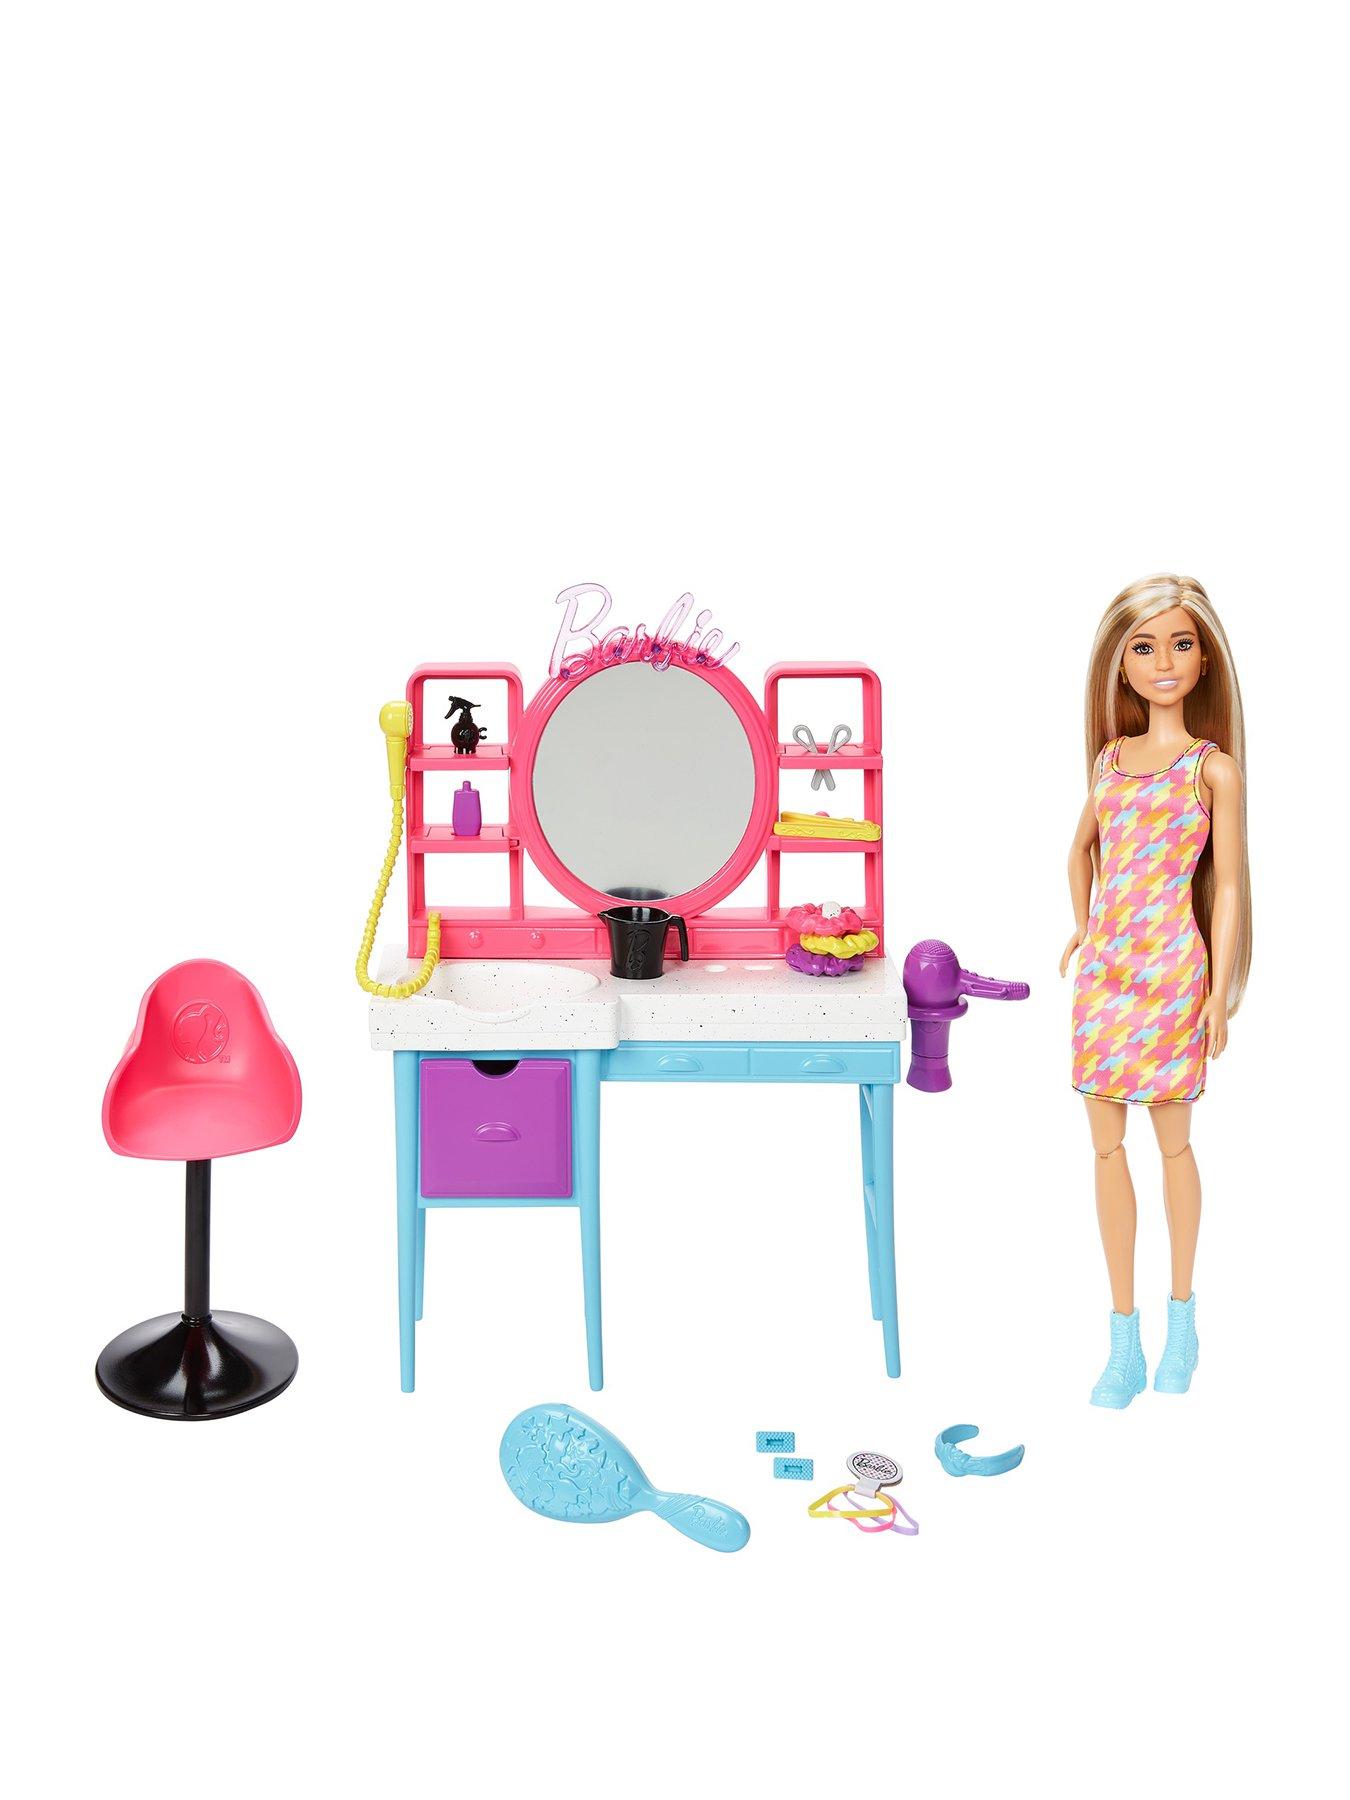 For Barbie Doll Furniture Accessories Plastic Toy With Light Dressing Table  Wardrobe Wardrobe Set Play Holiday Gift Girl DIY - AliExpress